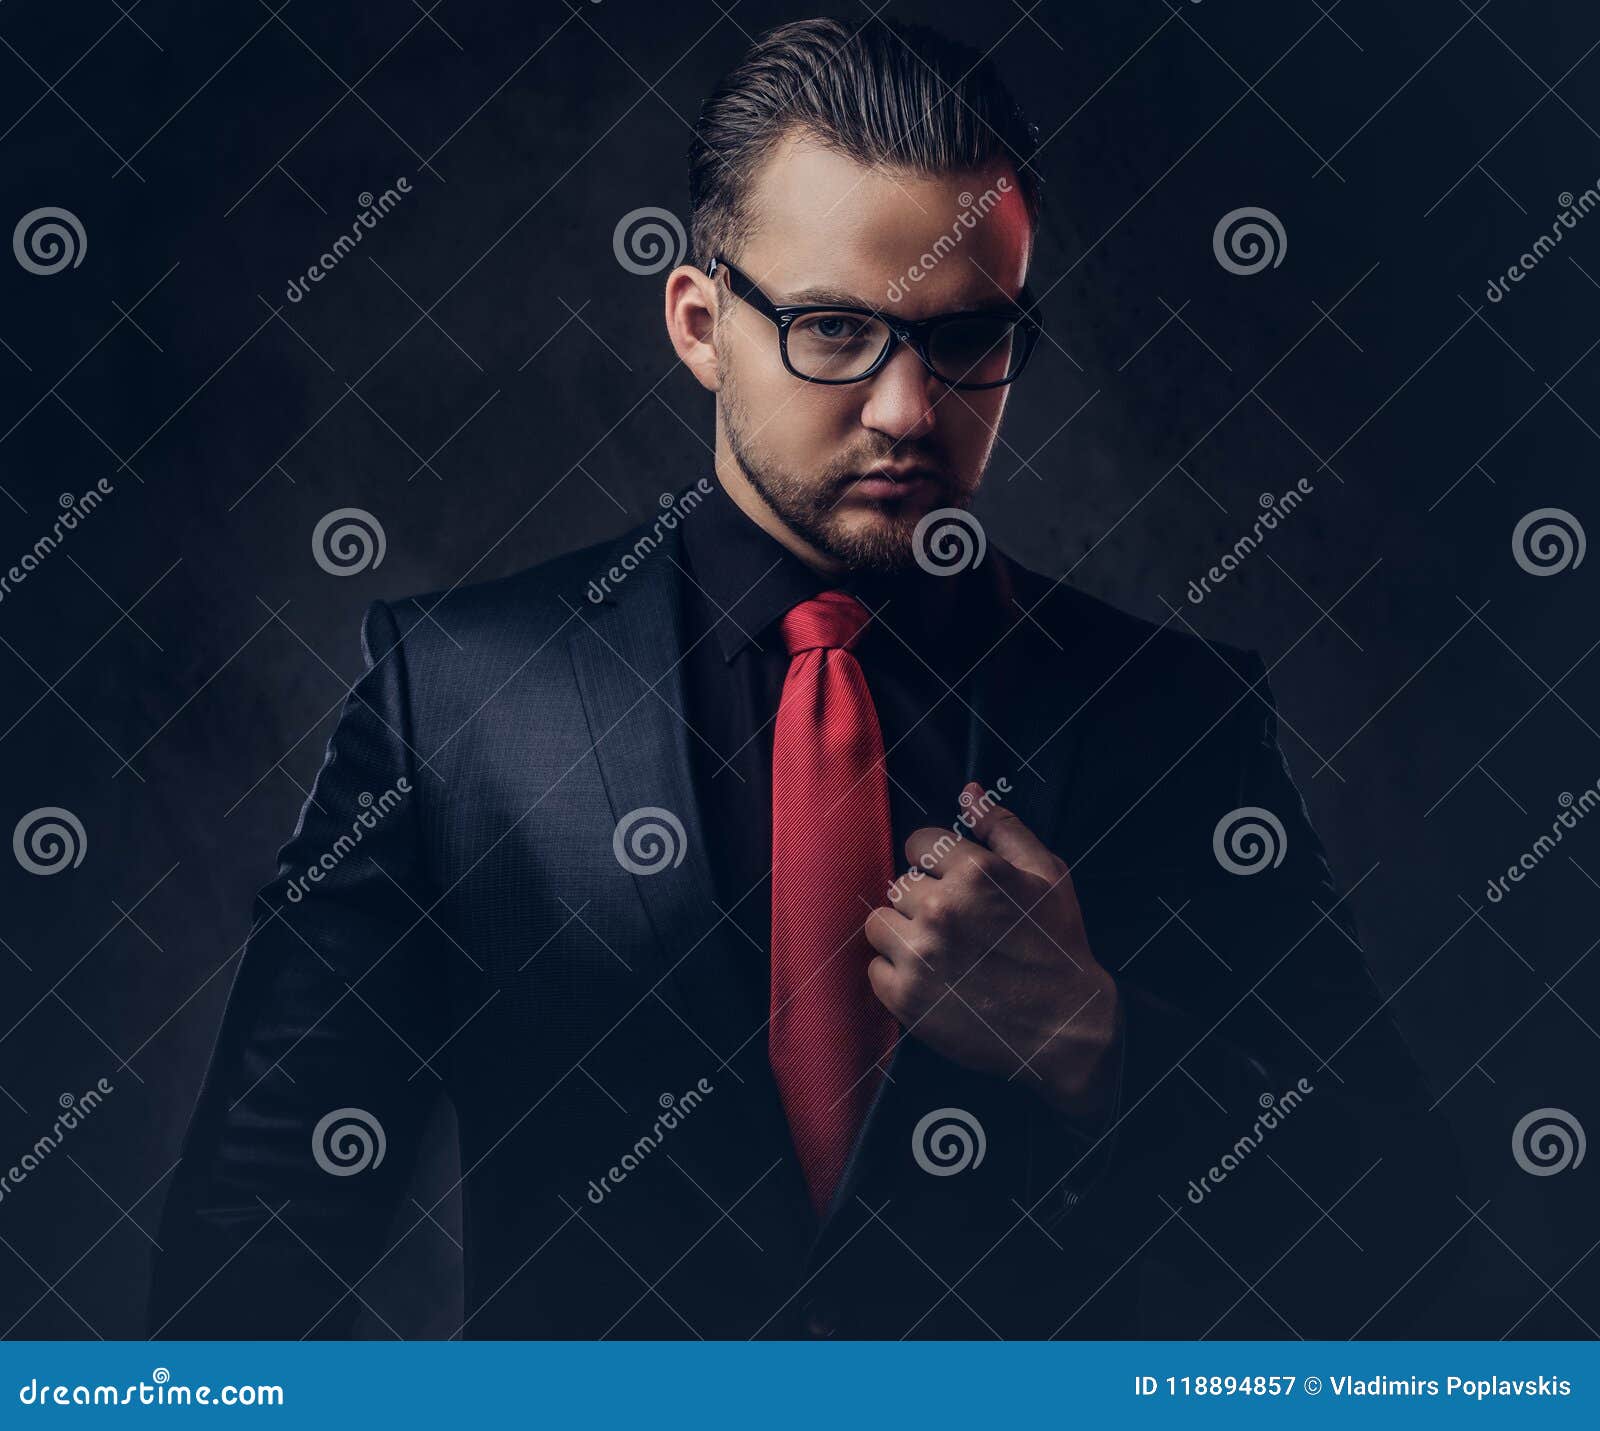 black dress shirt and red tie